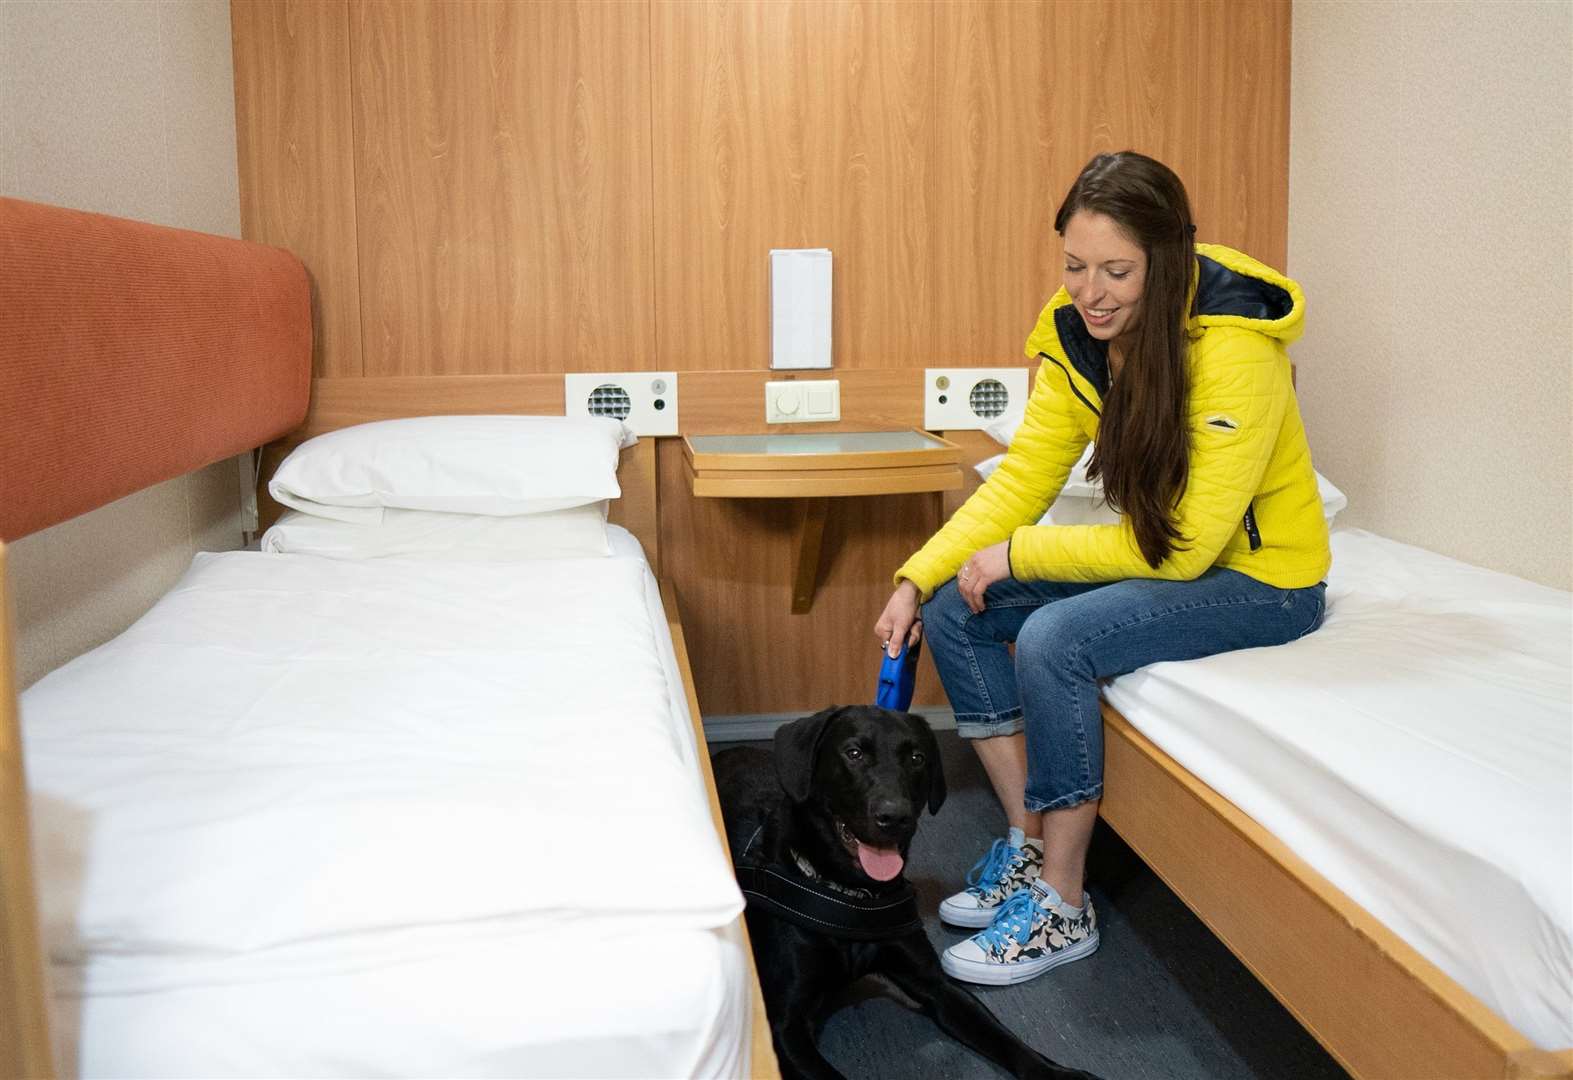 NorthLink introduces petfriendly cabins